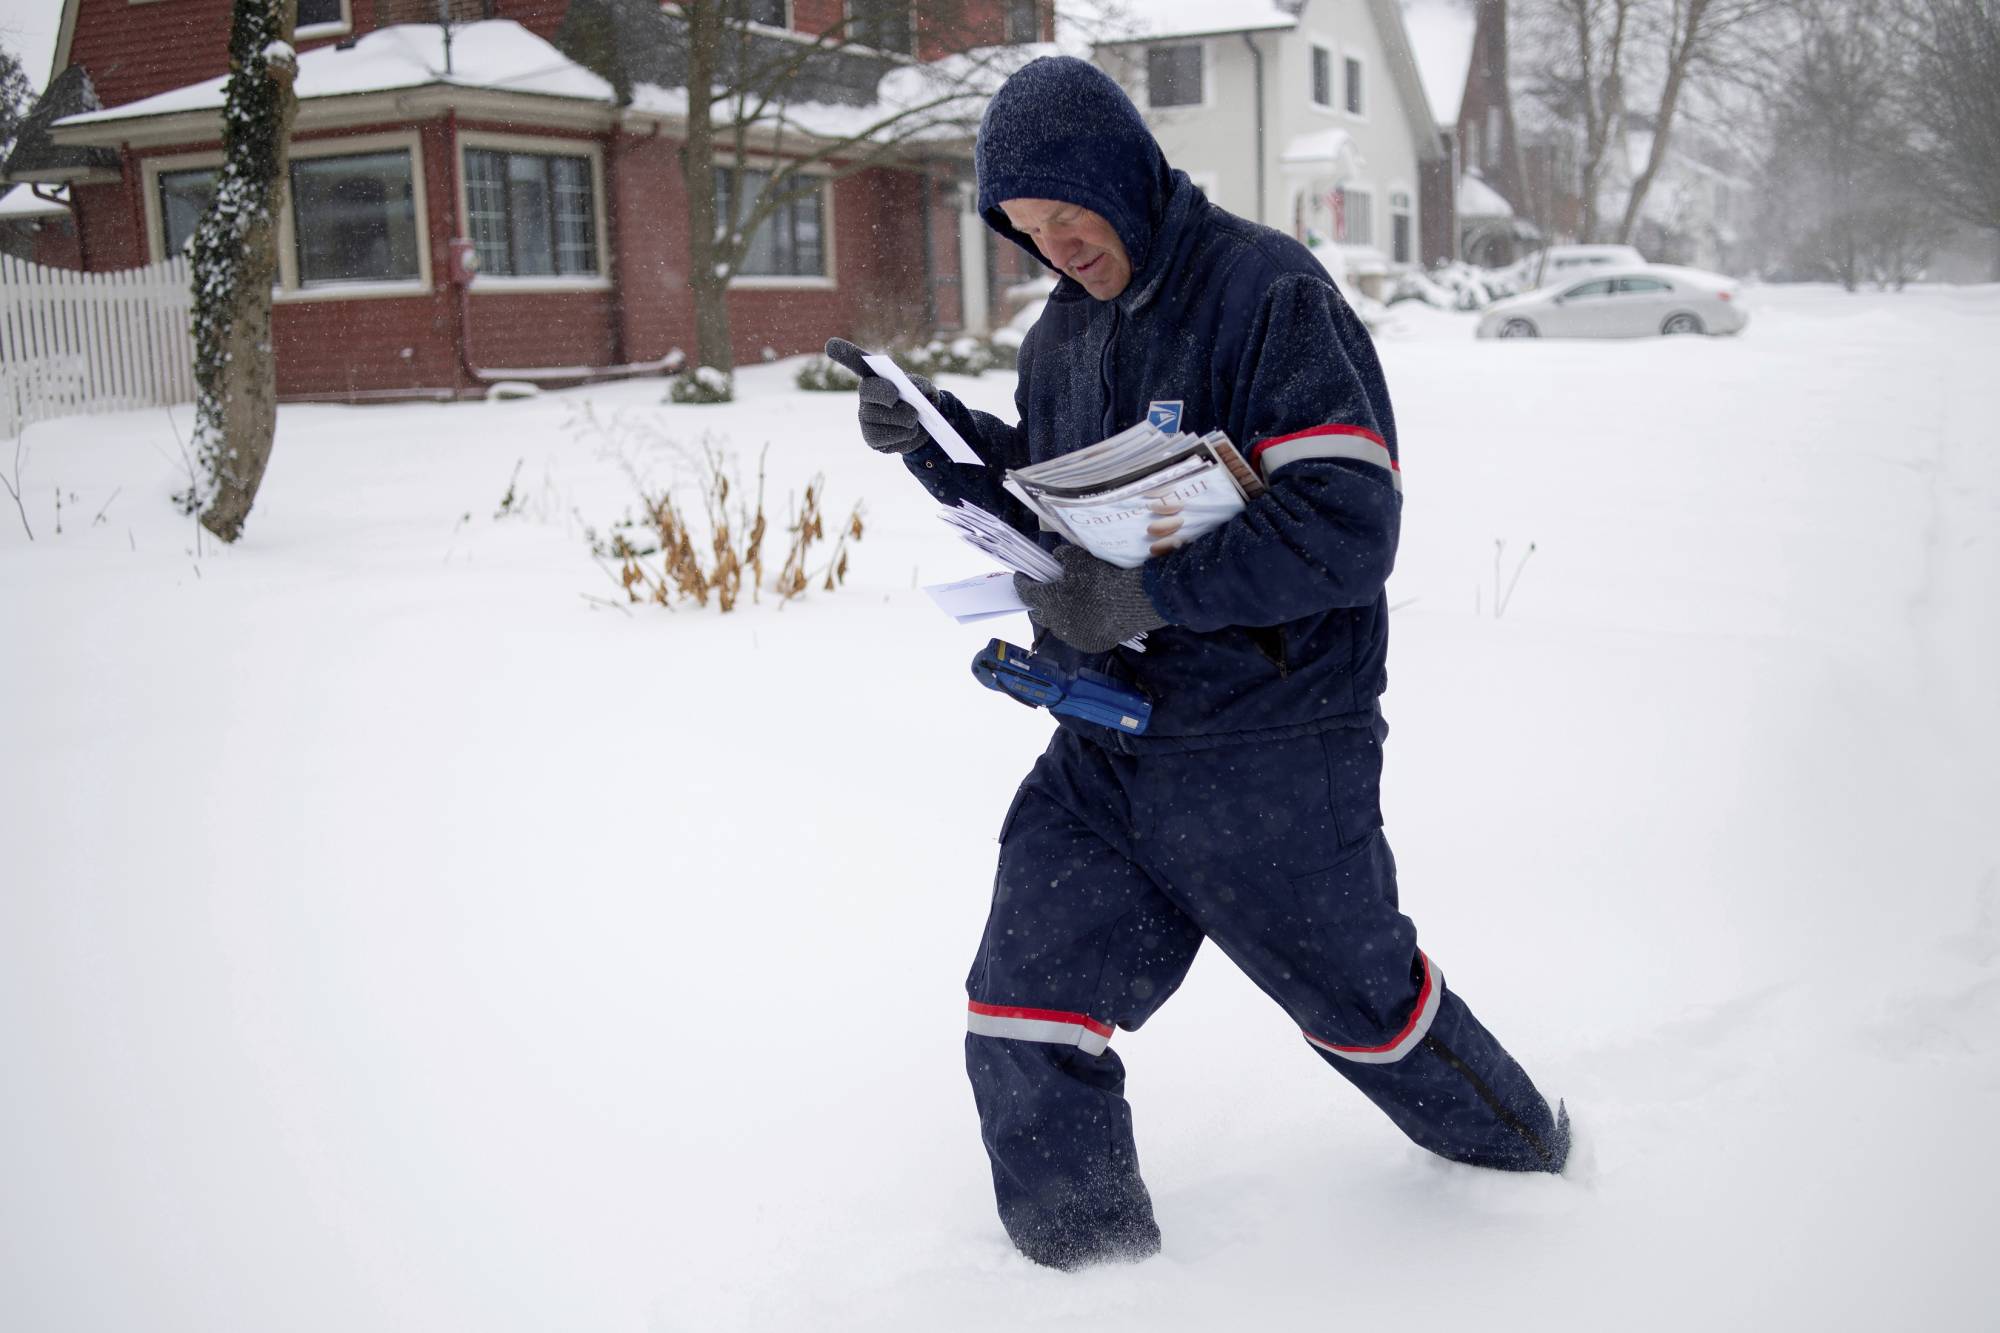 United States Postal Service letter carrier Keith Caniff sorts mail on his route in East Grand Rapids, Mich., Monday, Jan. 28, 2019. (Neil Blake/The Grand Rapids Press via AP)